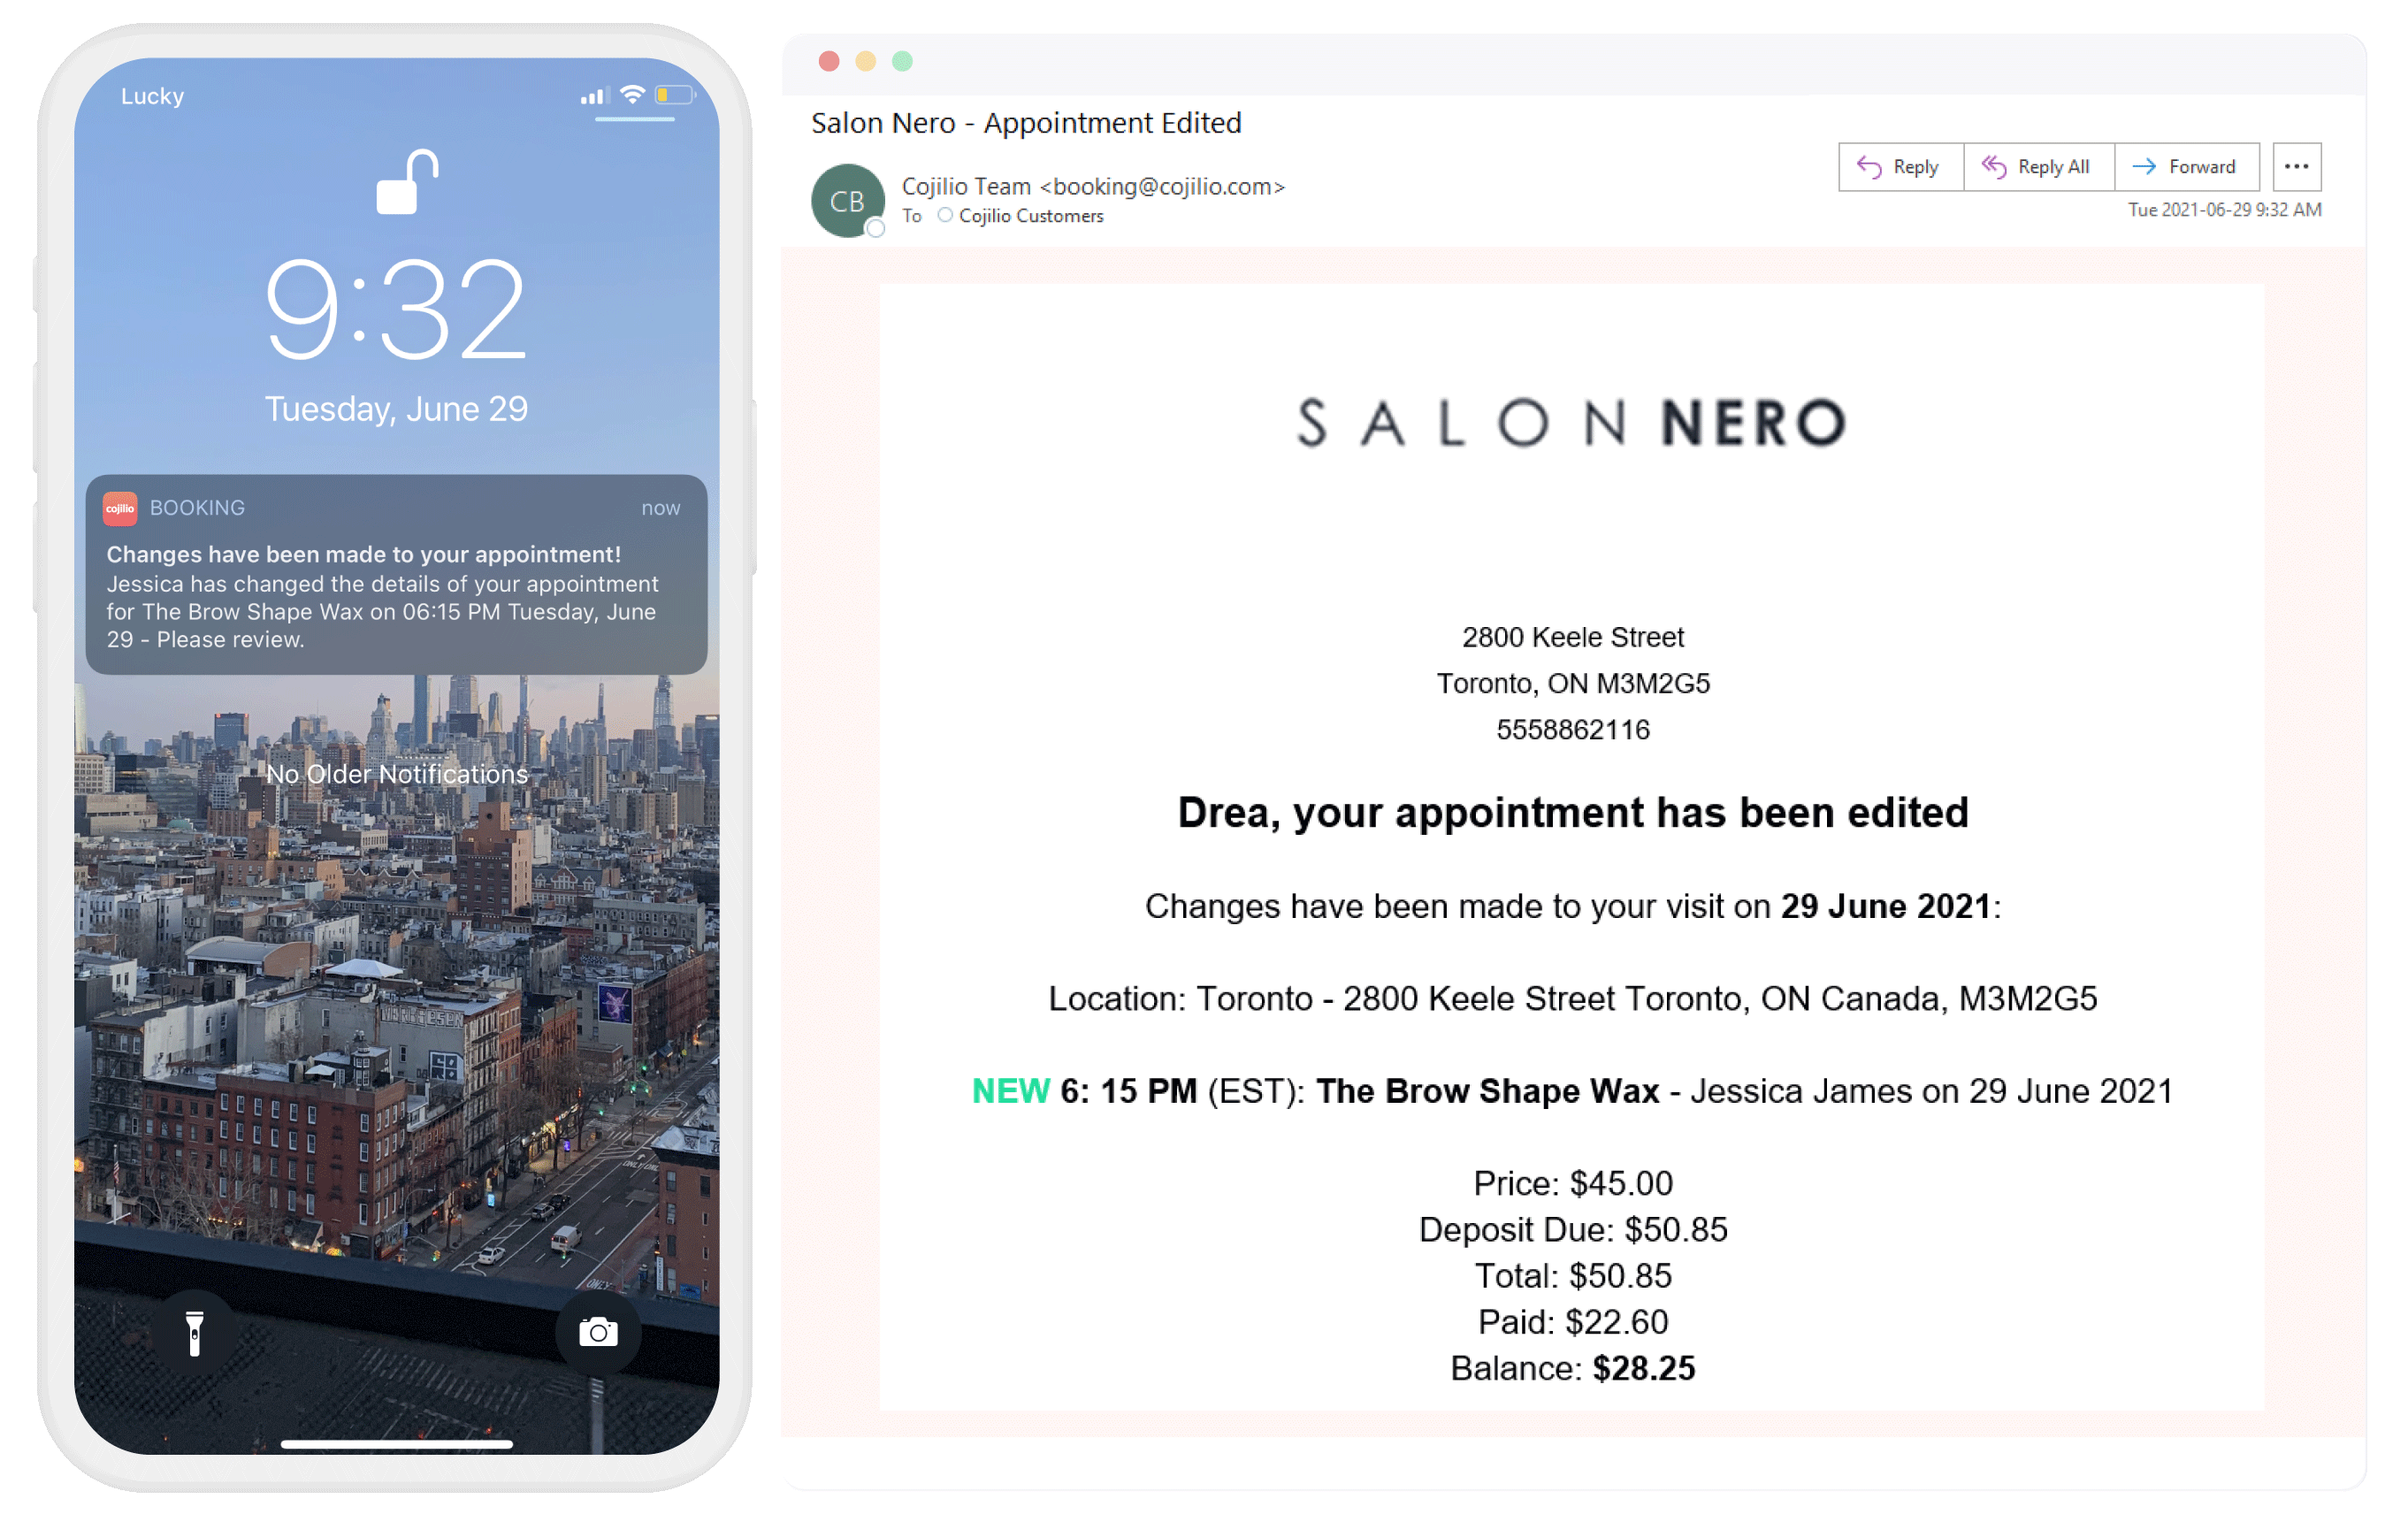 Cojilio-Business_Edit-appointment-details-5.png